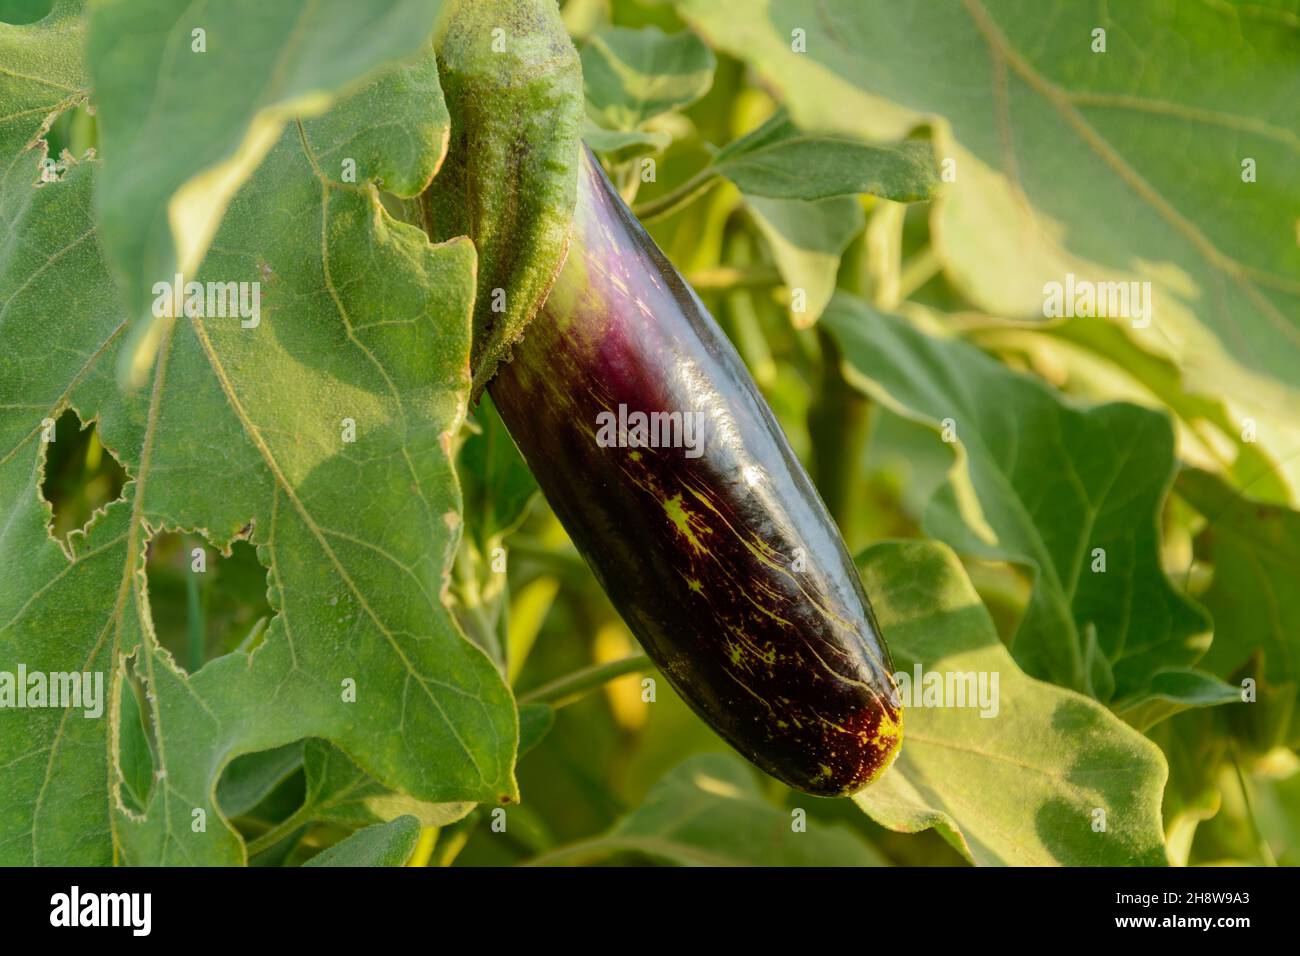 Eggplant hanging from the plant in the garden. Fresh organic eggplant aubergine and its flower with morning light on it. side view from Purple aubergi Stock Photo